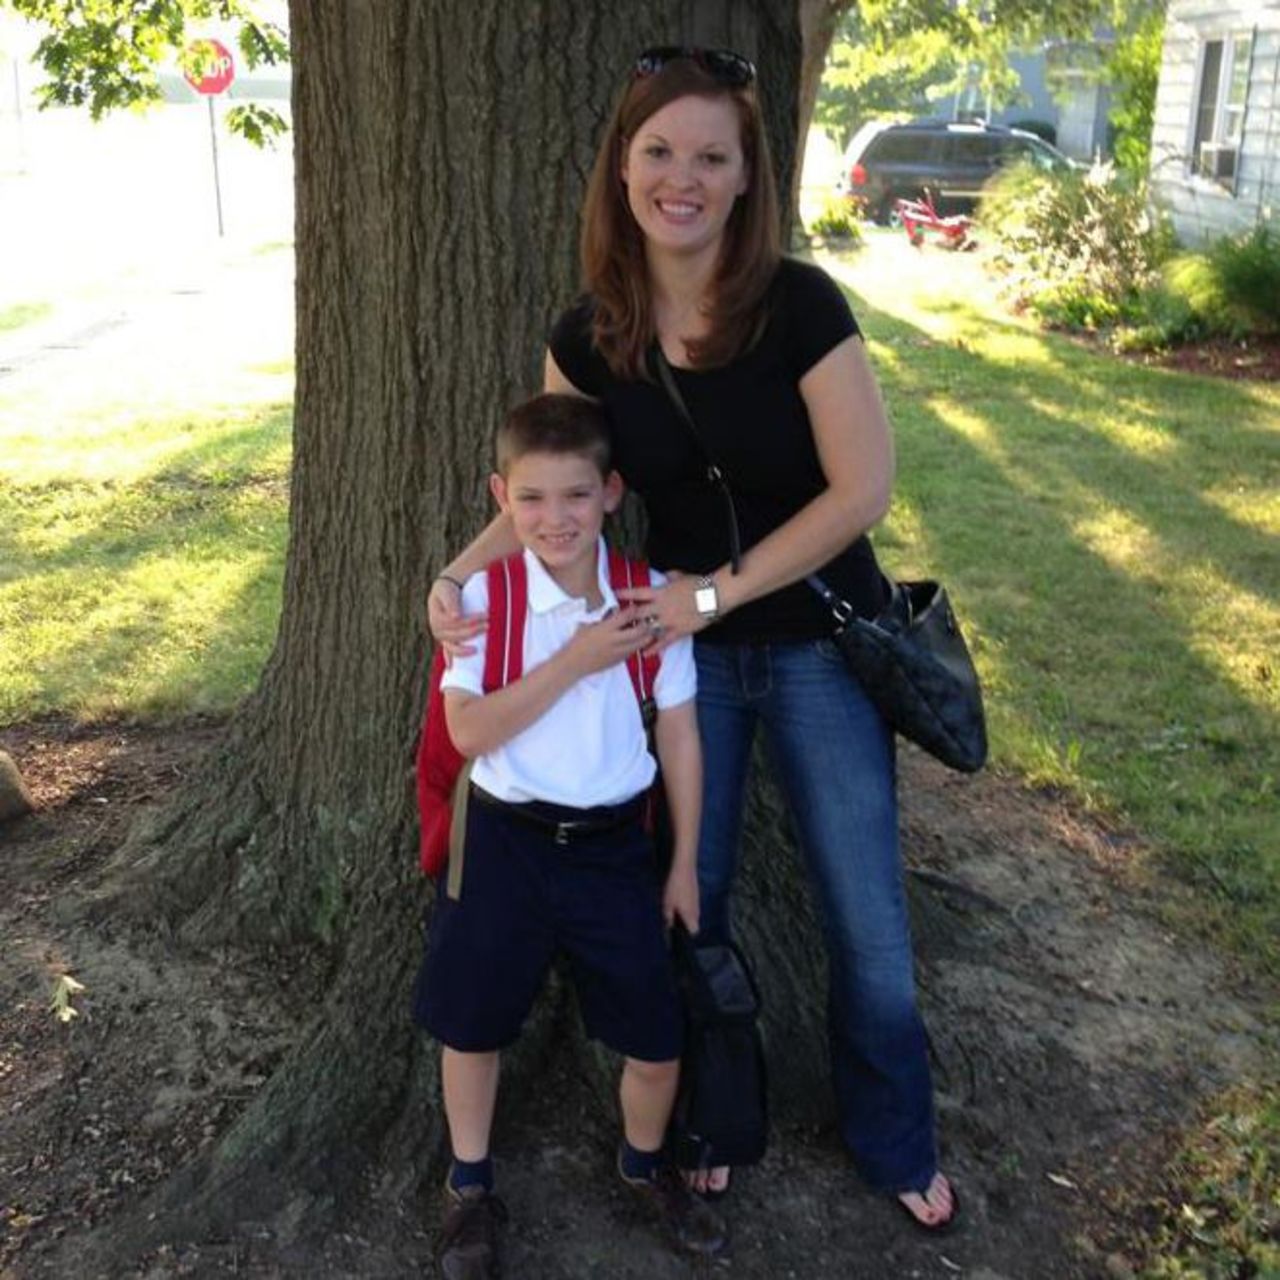 Writer Jessica Crookston poses with her son in their yard on the first day of school this year. Samuel recently started third grade. "Realizing that in 10 years Samuel would be starting college, I felt even more strongly that I had no desire to begin again with a baby," she said. 